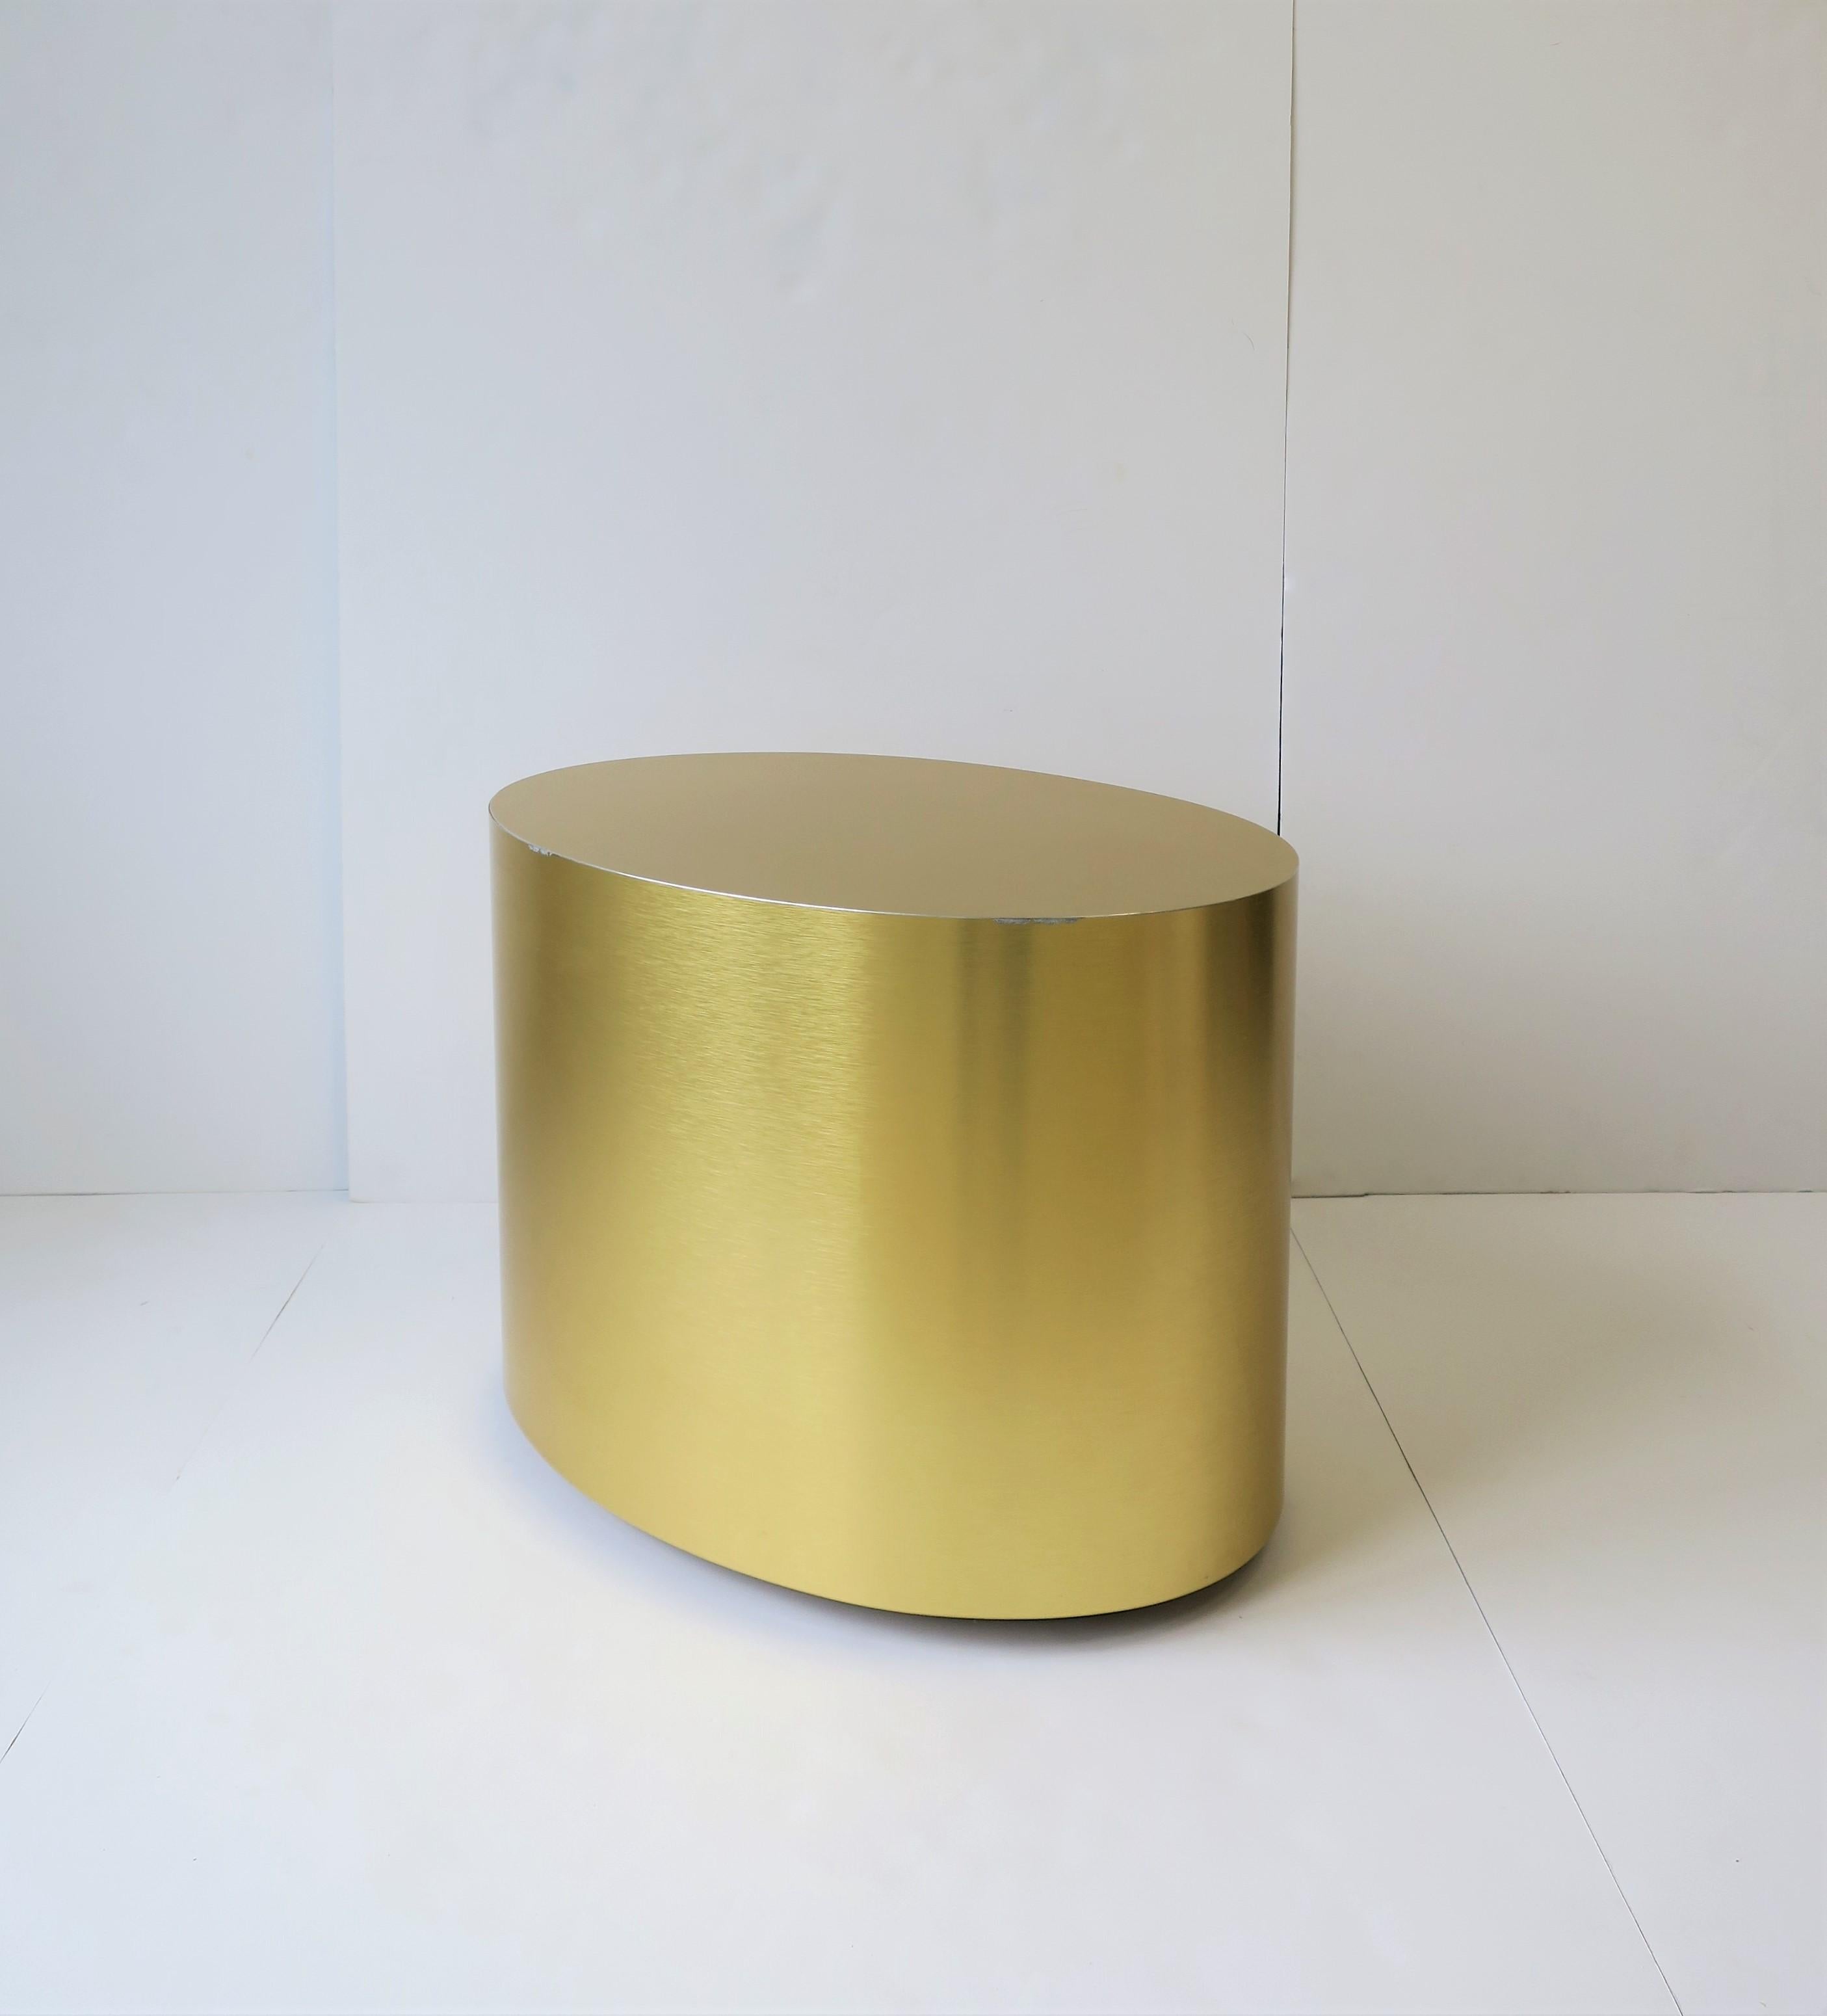 A relatively small but substantial 'brushed' gold oval cocktail/coffee, side, or end table. Depending on your environment, piece can work equally well as all three (coffee, side, or end) as demonstrated in images. The oval shape is a nice